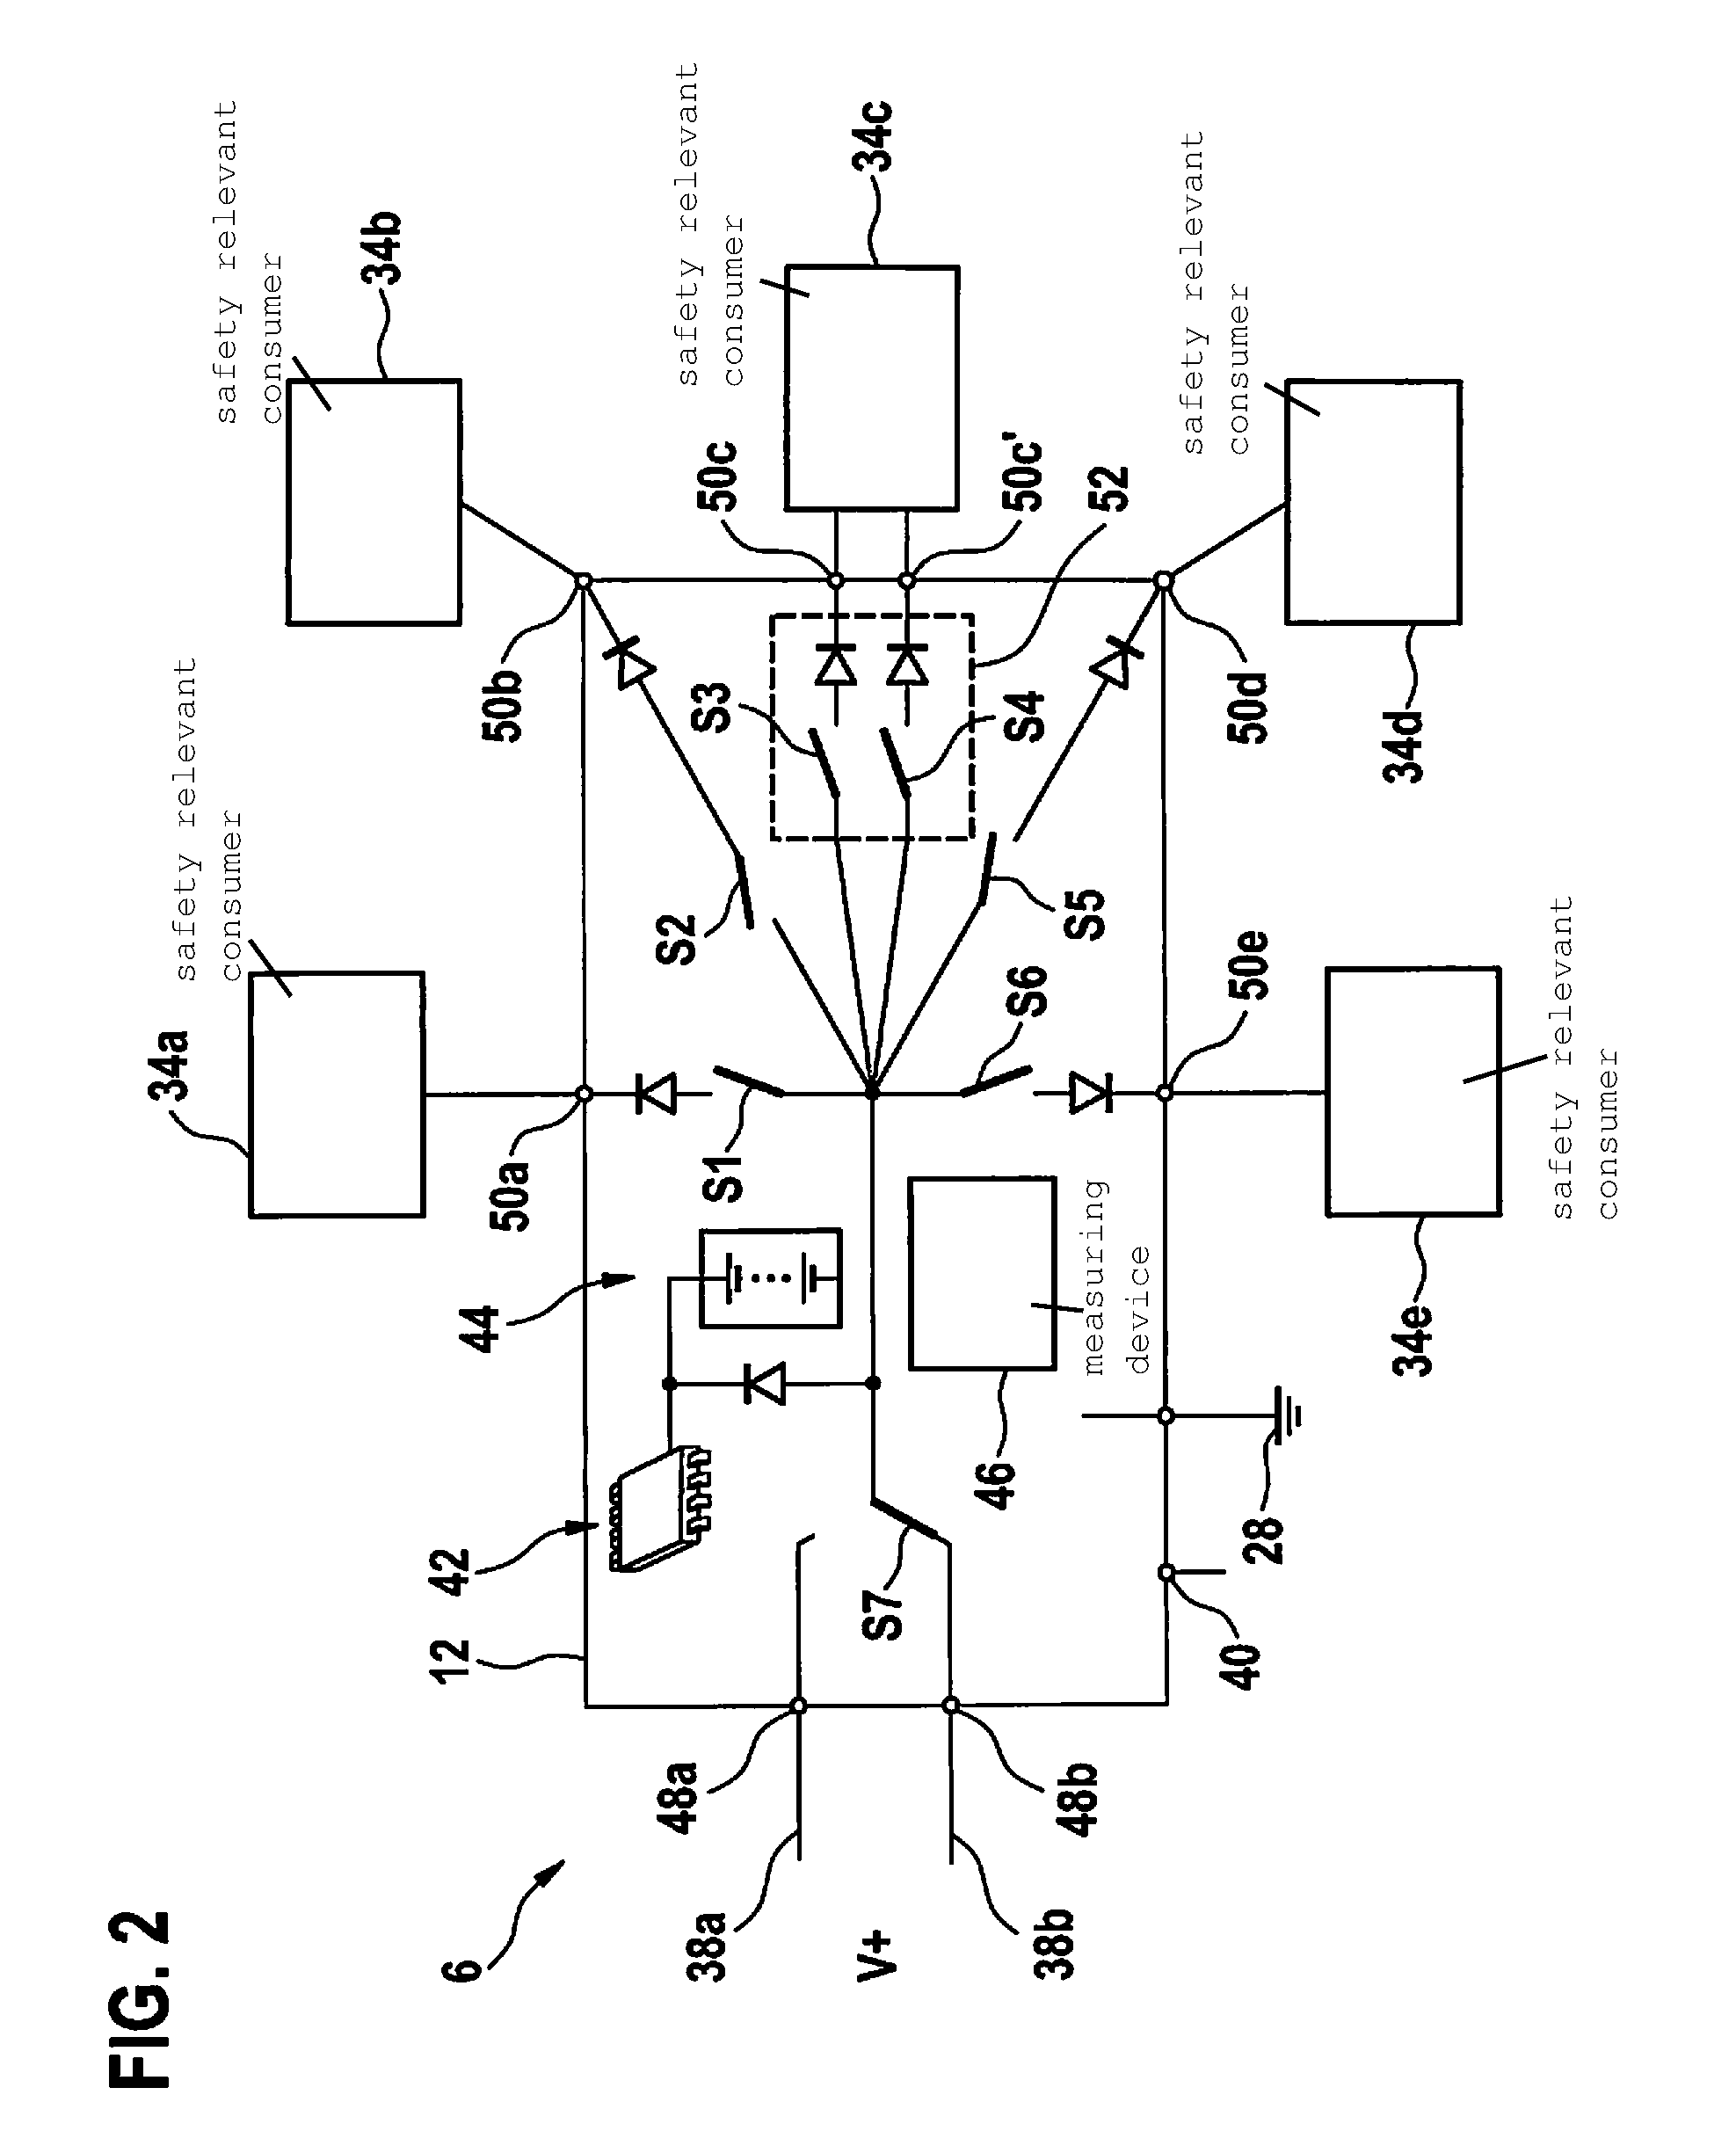 Power transmission device and vehicle electrical system